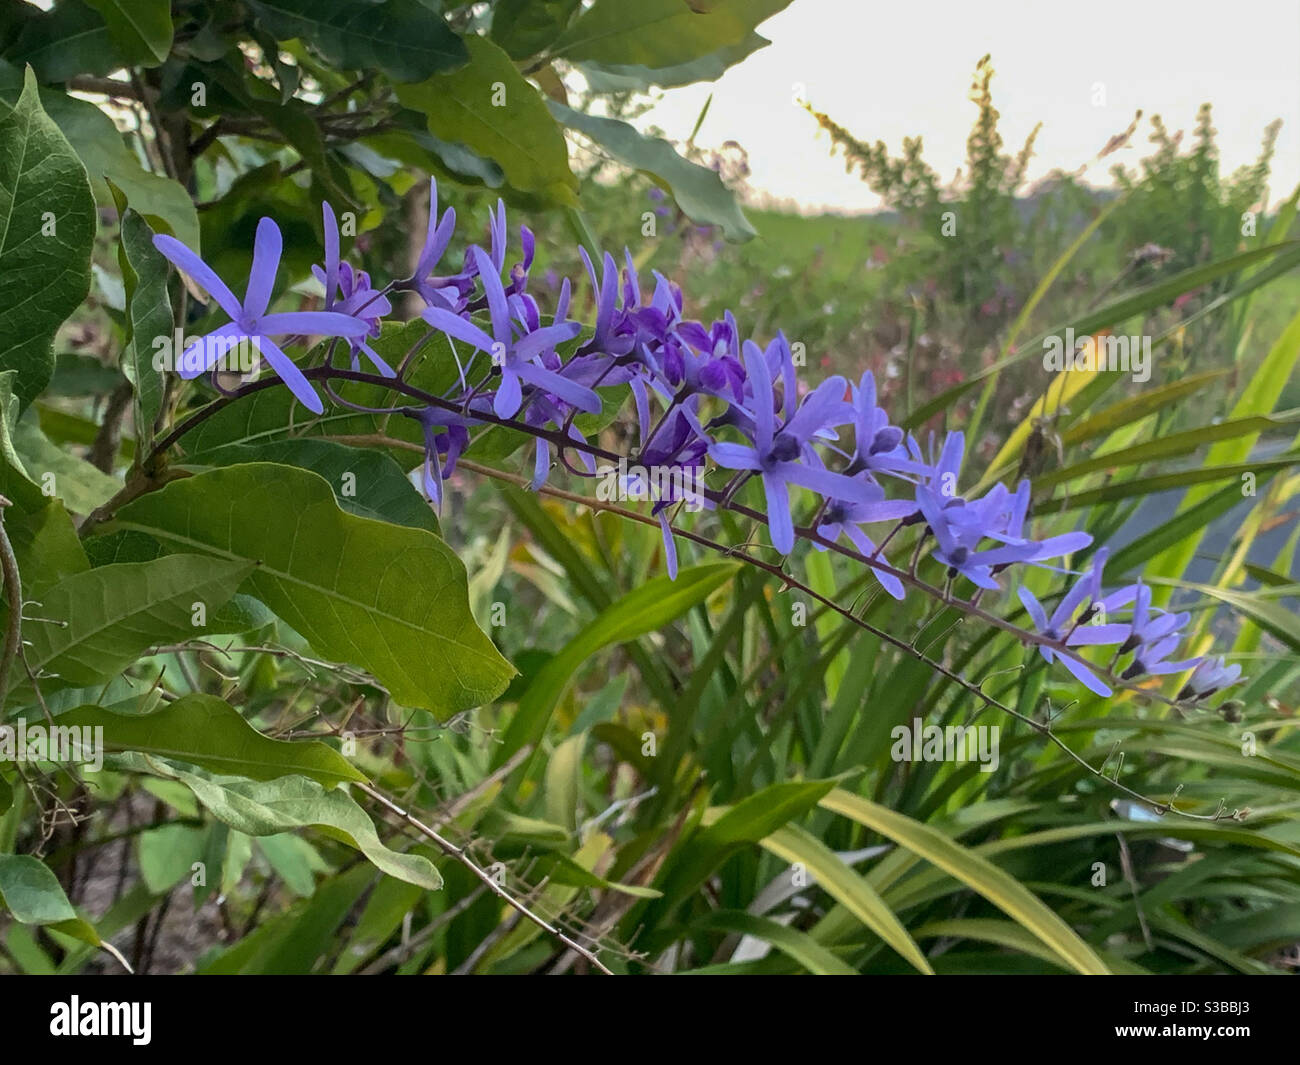 A spray of brilliant purple flowers of a Petrea or fake Wisteria vine against the green foliage of an Australian garden in the late spring afternoon Stock Photo